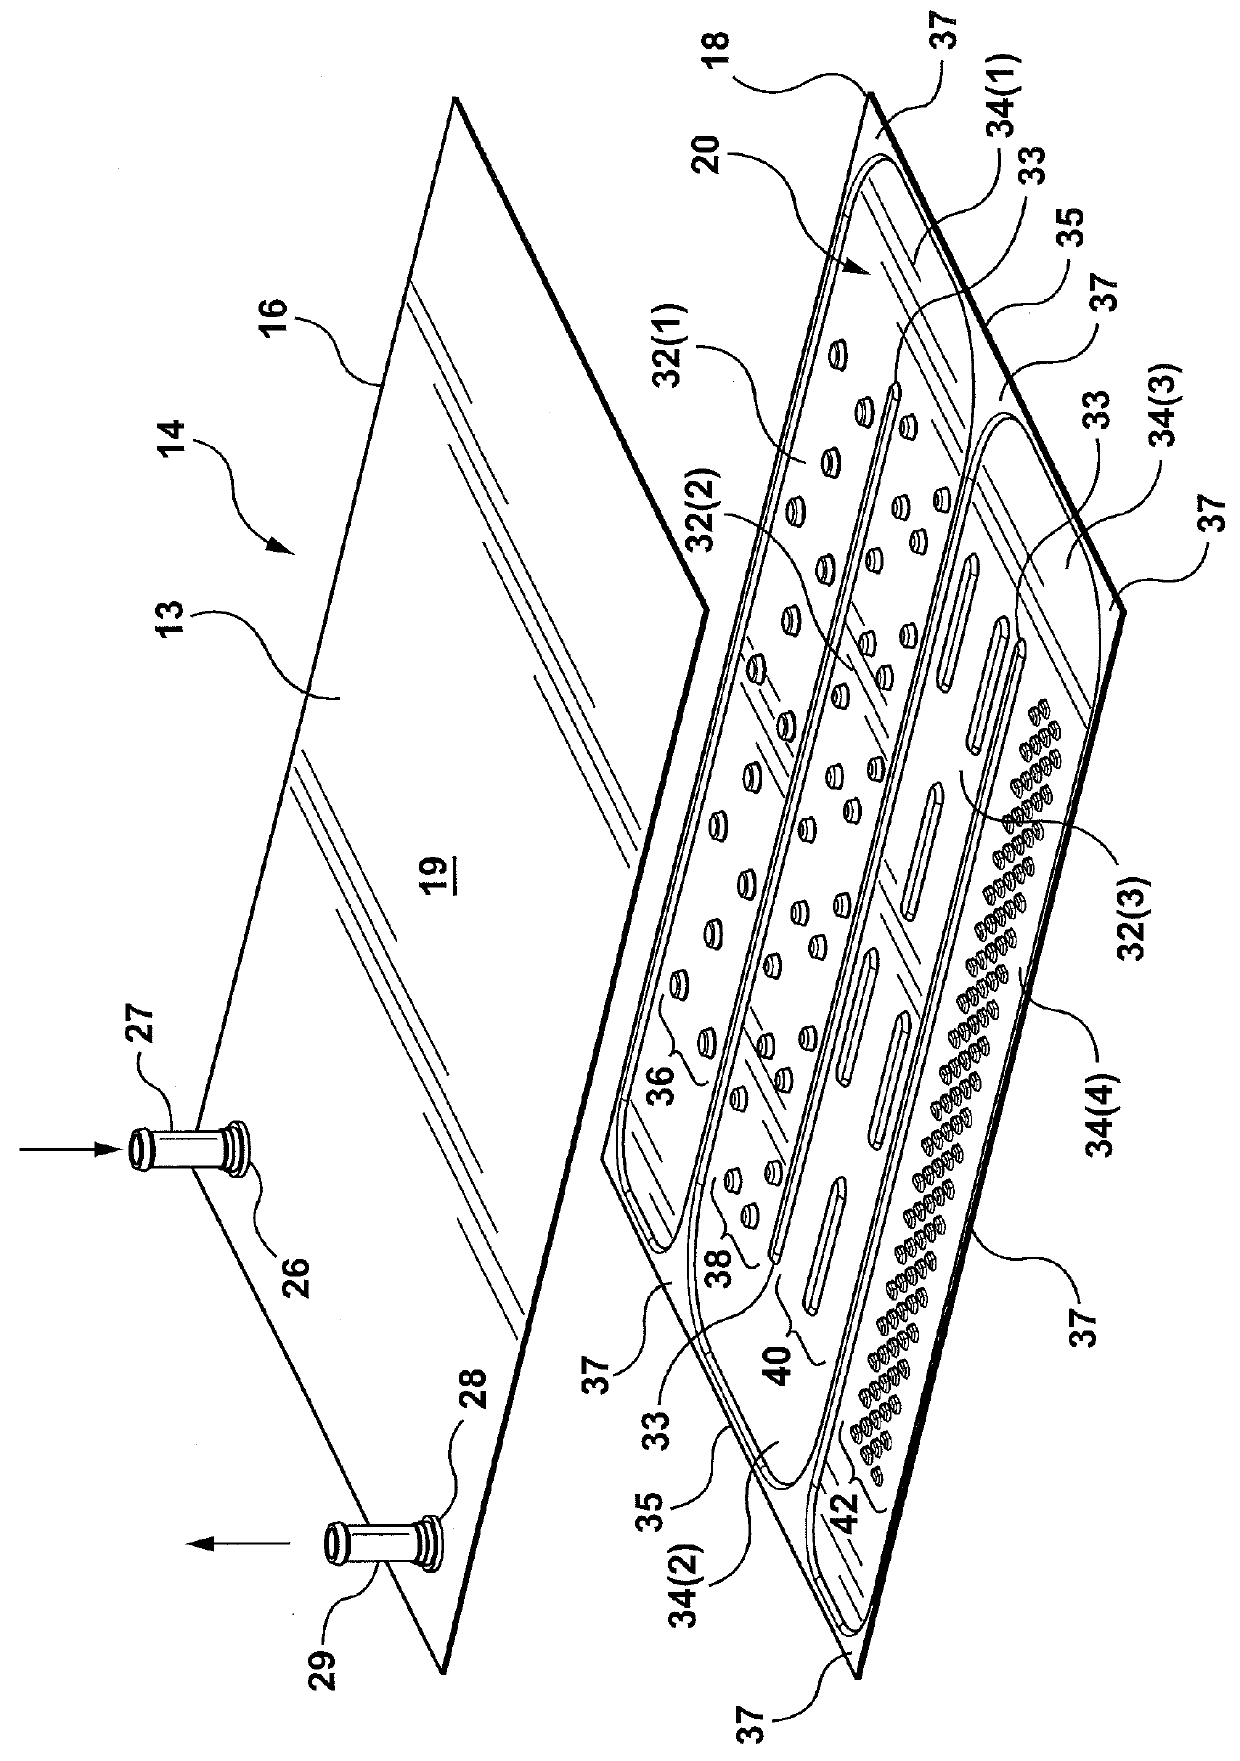 Battery cell heat exchanger with graded heat transfer surface